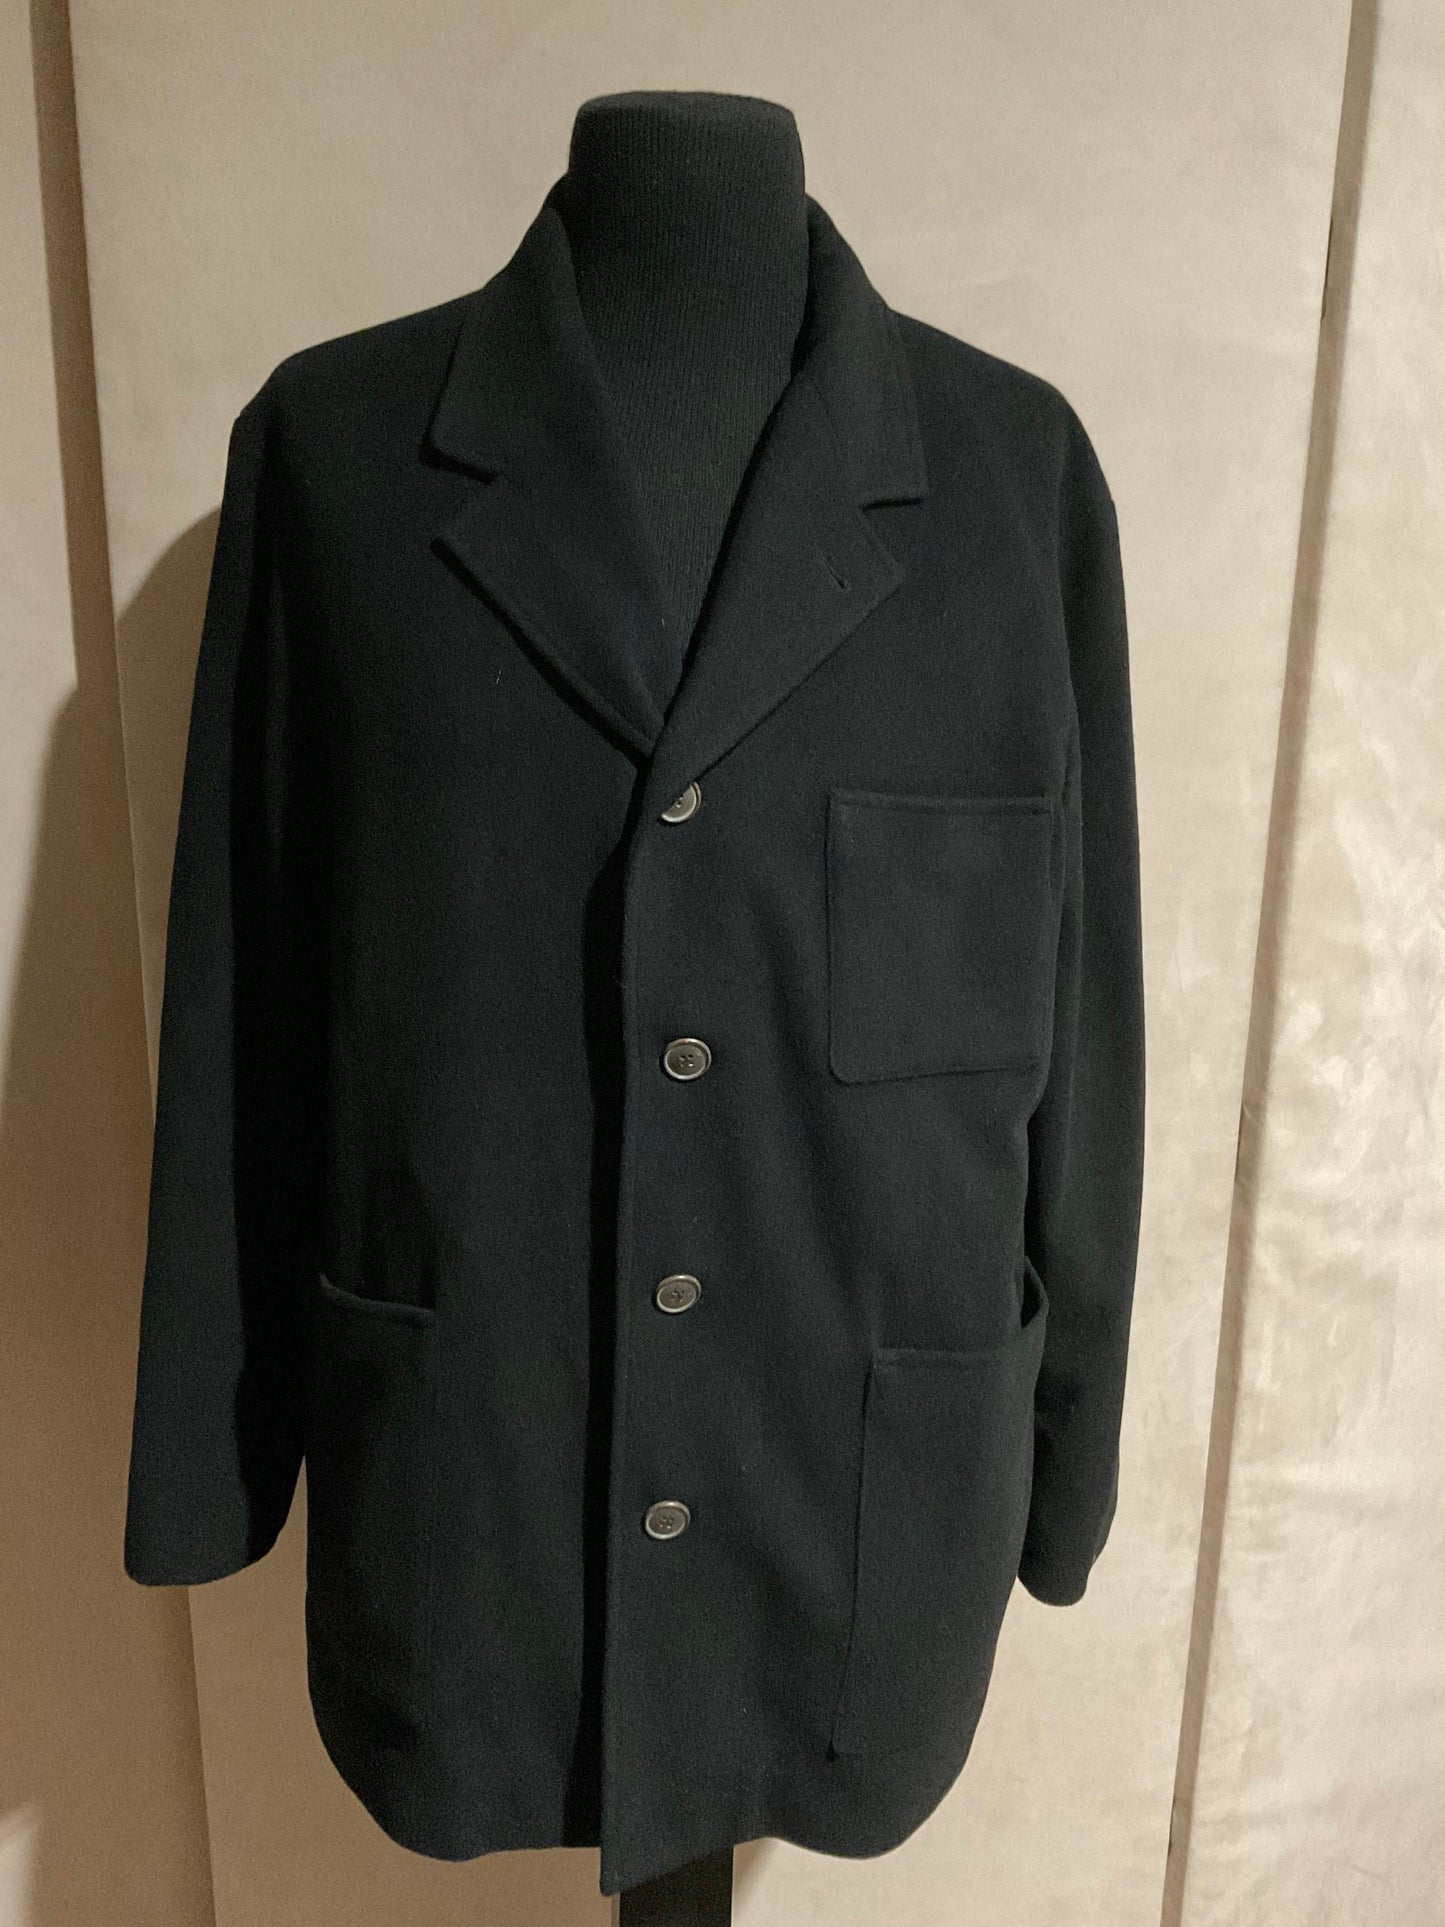 R P JACKET / BLACK WOOL /  LARGE / NEW / UNCONSTRUCTED / MADE IN USA